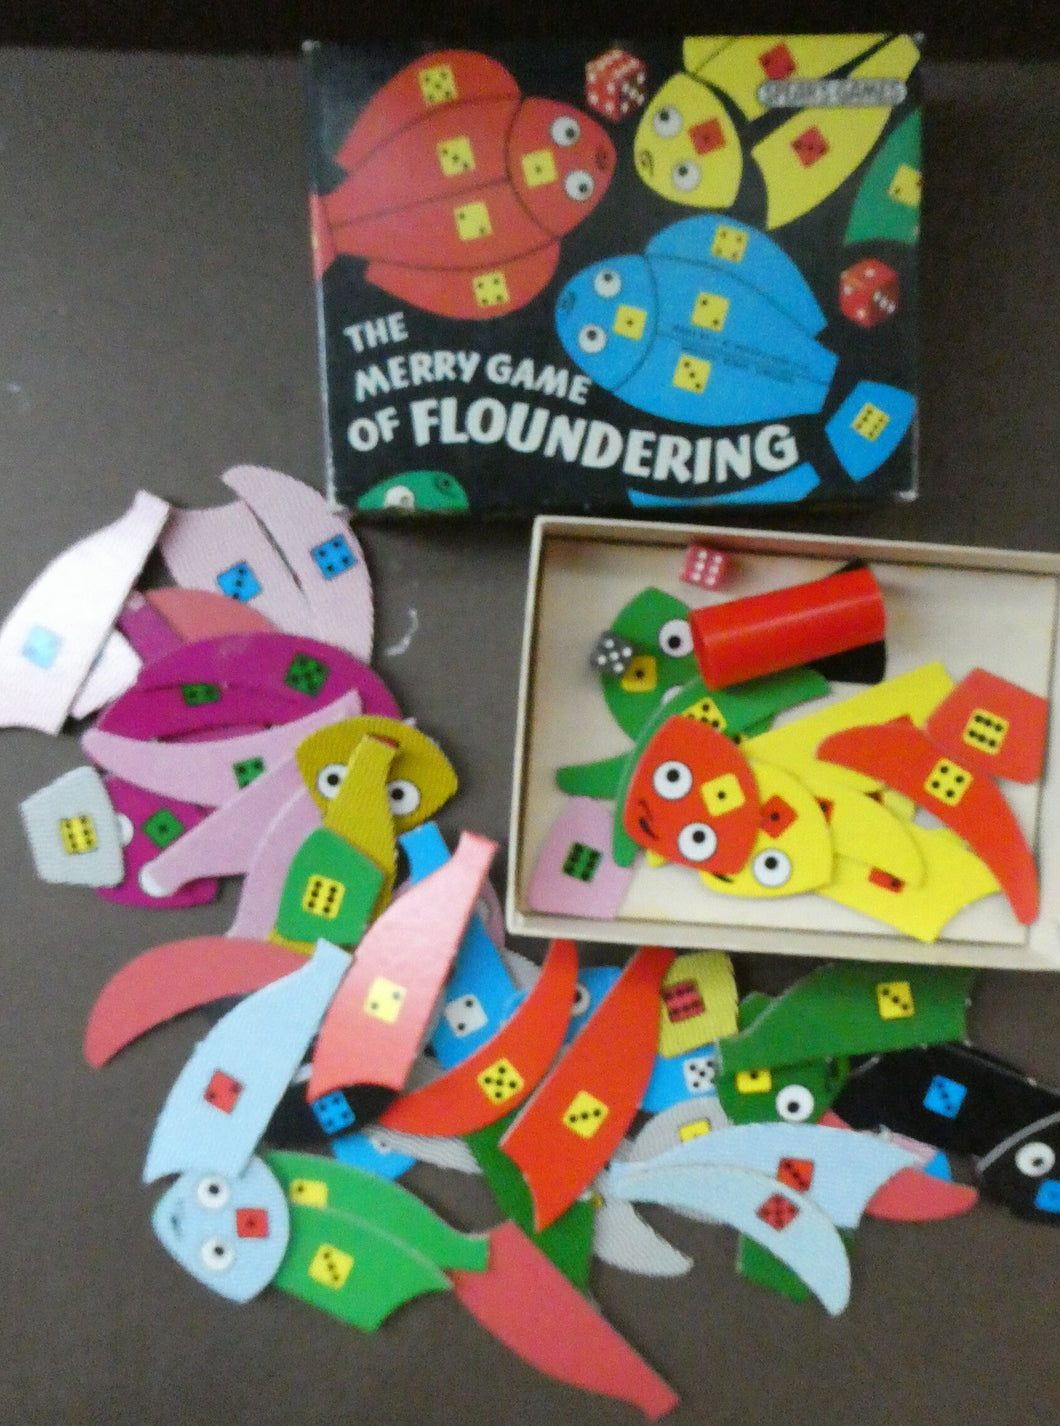 COMPLETE. Vintage The Merry Game of Floundering in Original Box by Spear's Games